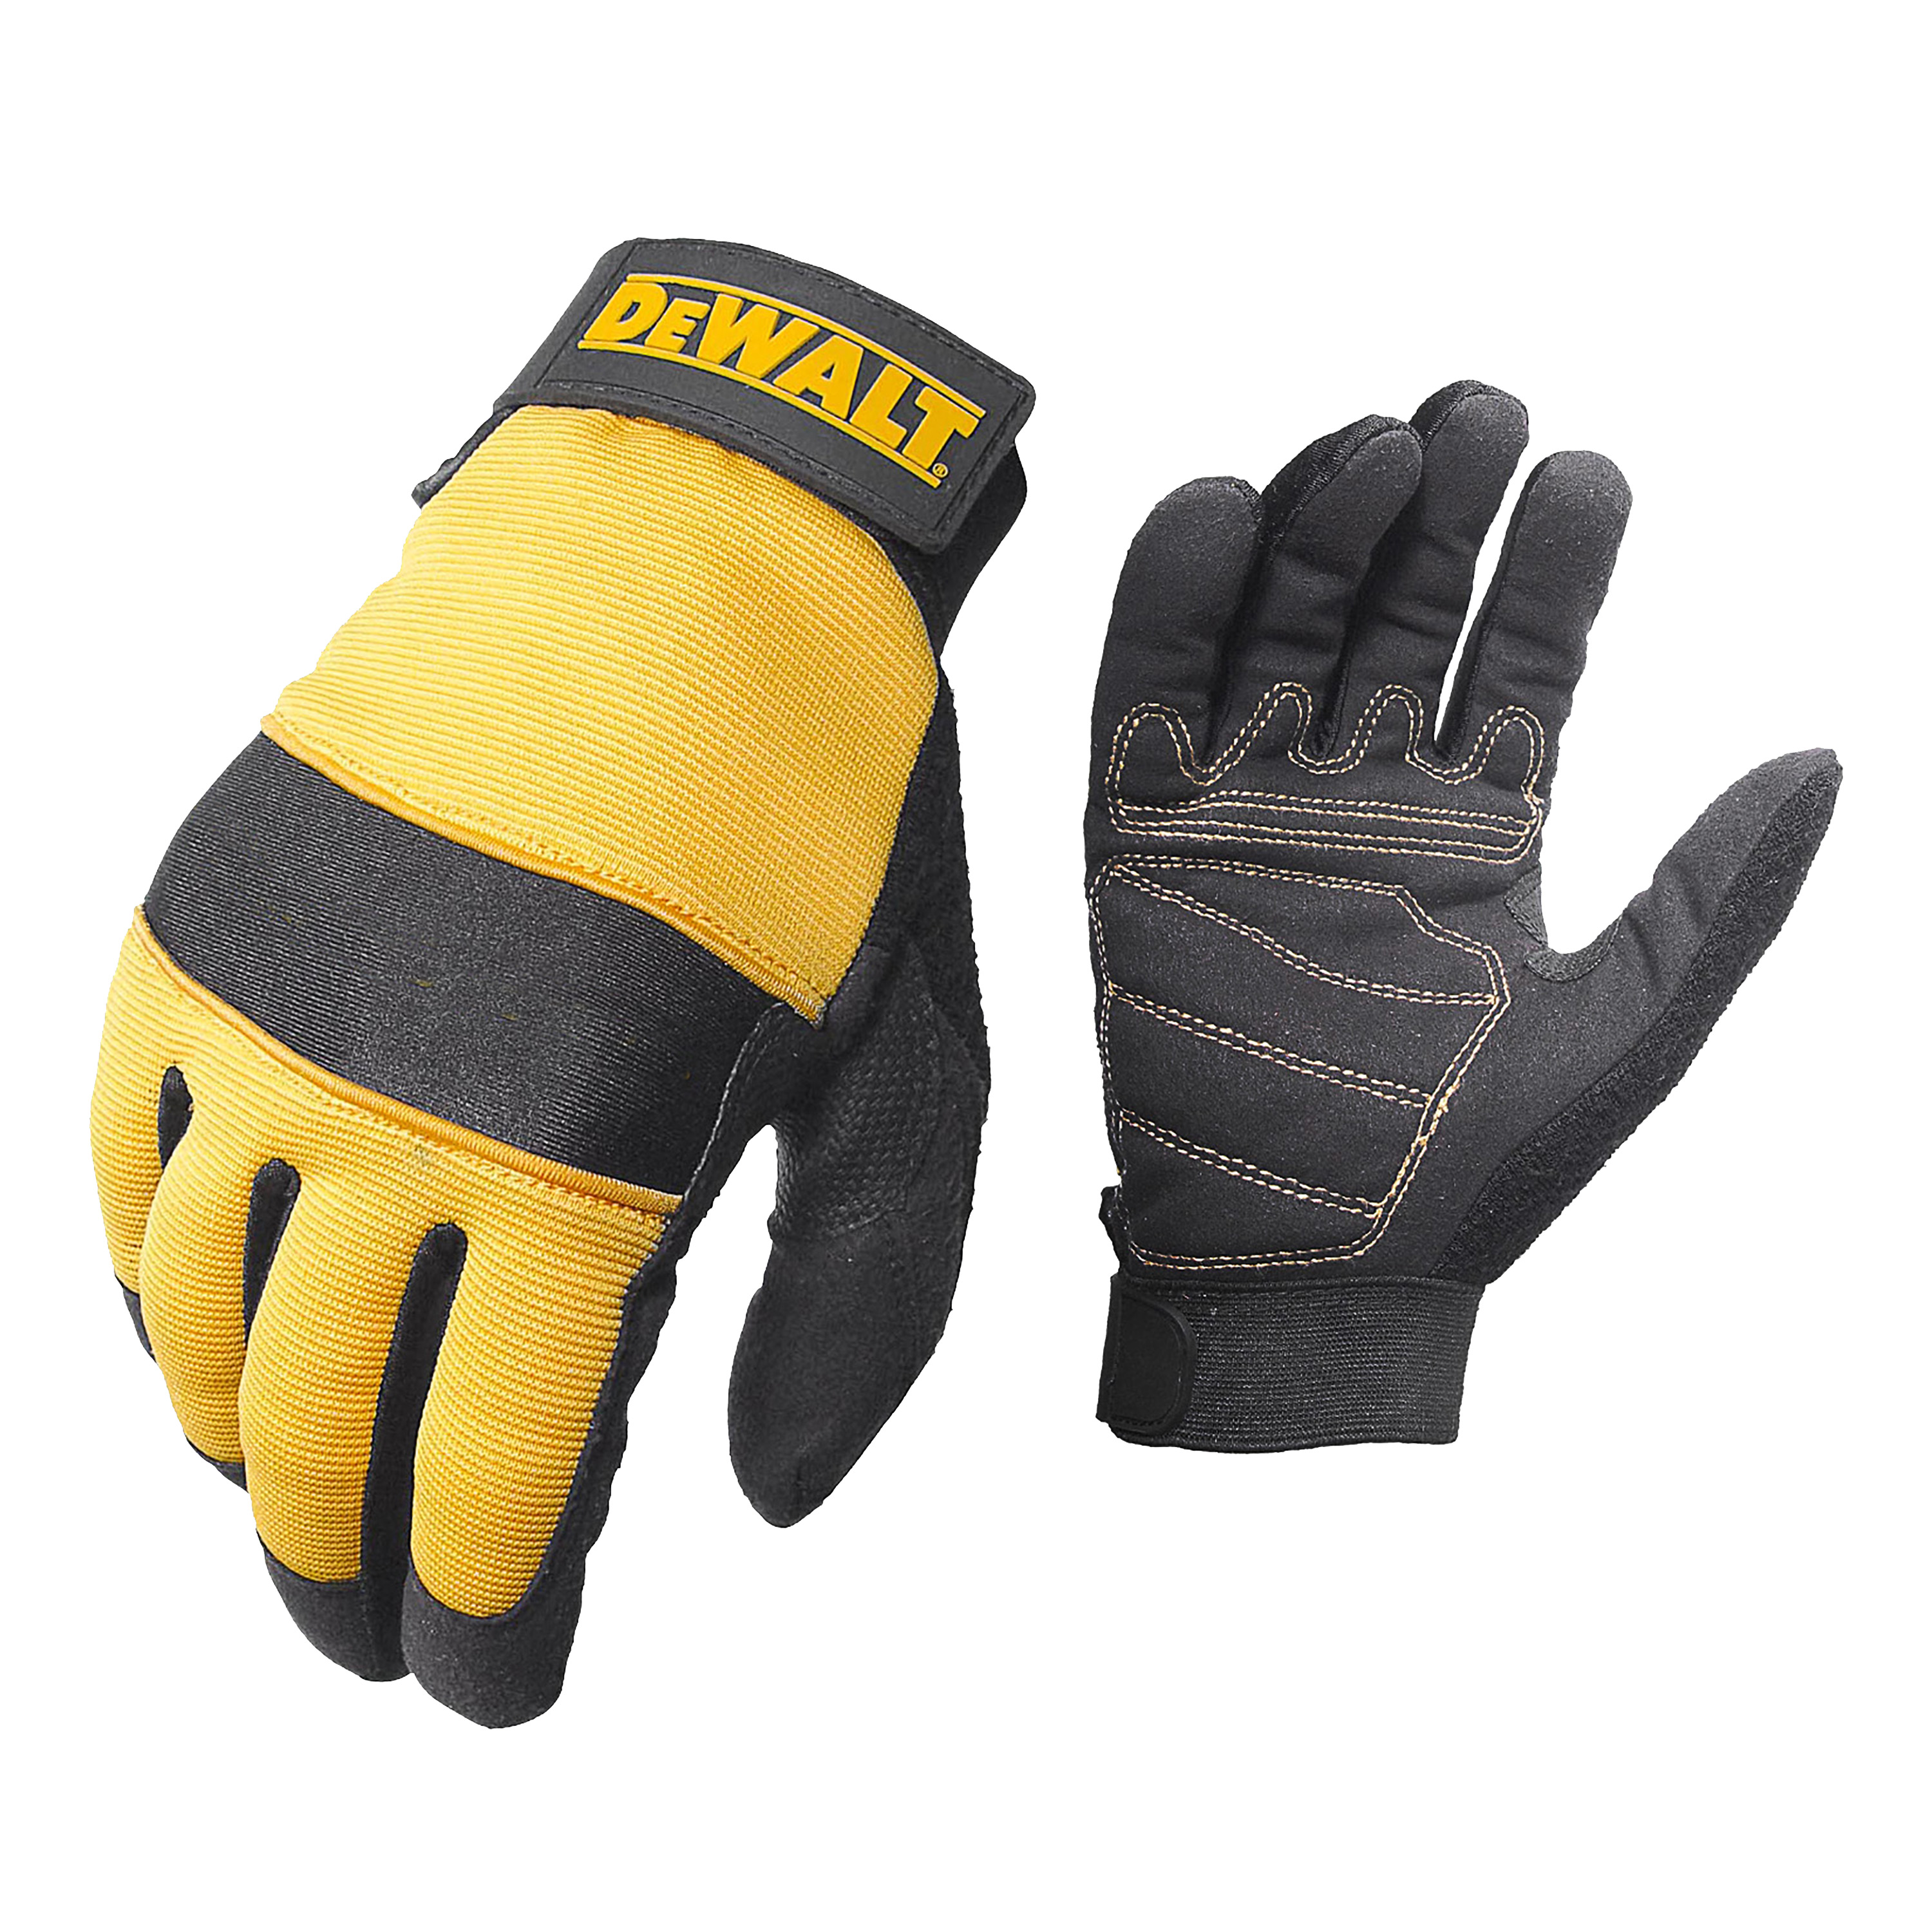 DPG20 All Purpose Synthetic Leather Glove - Size XL